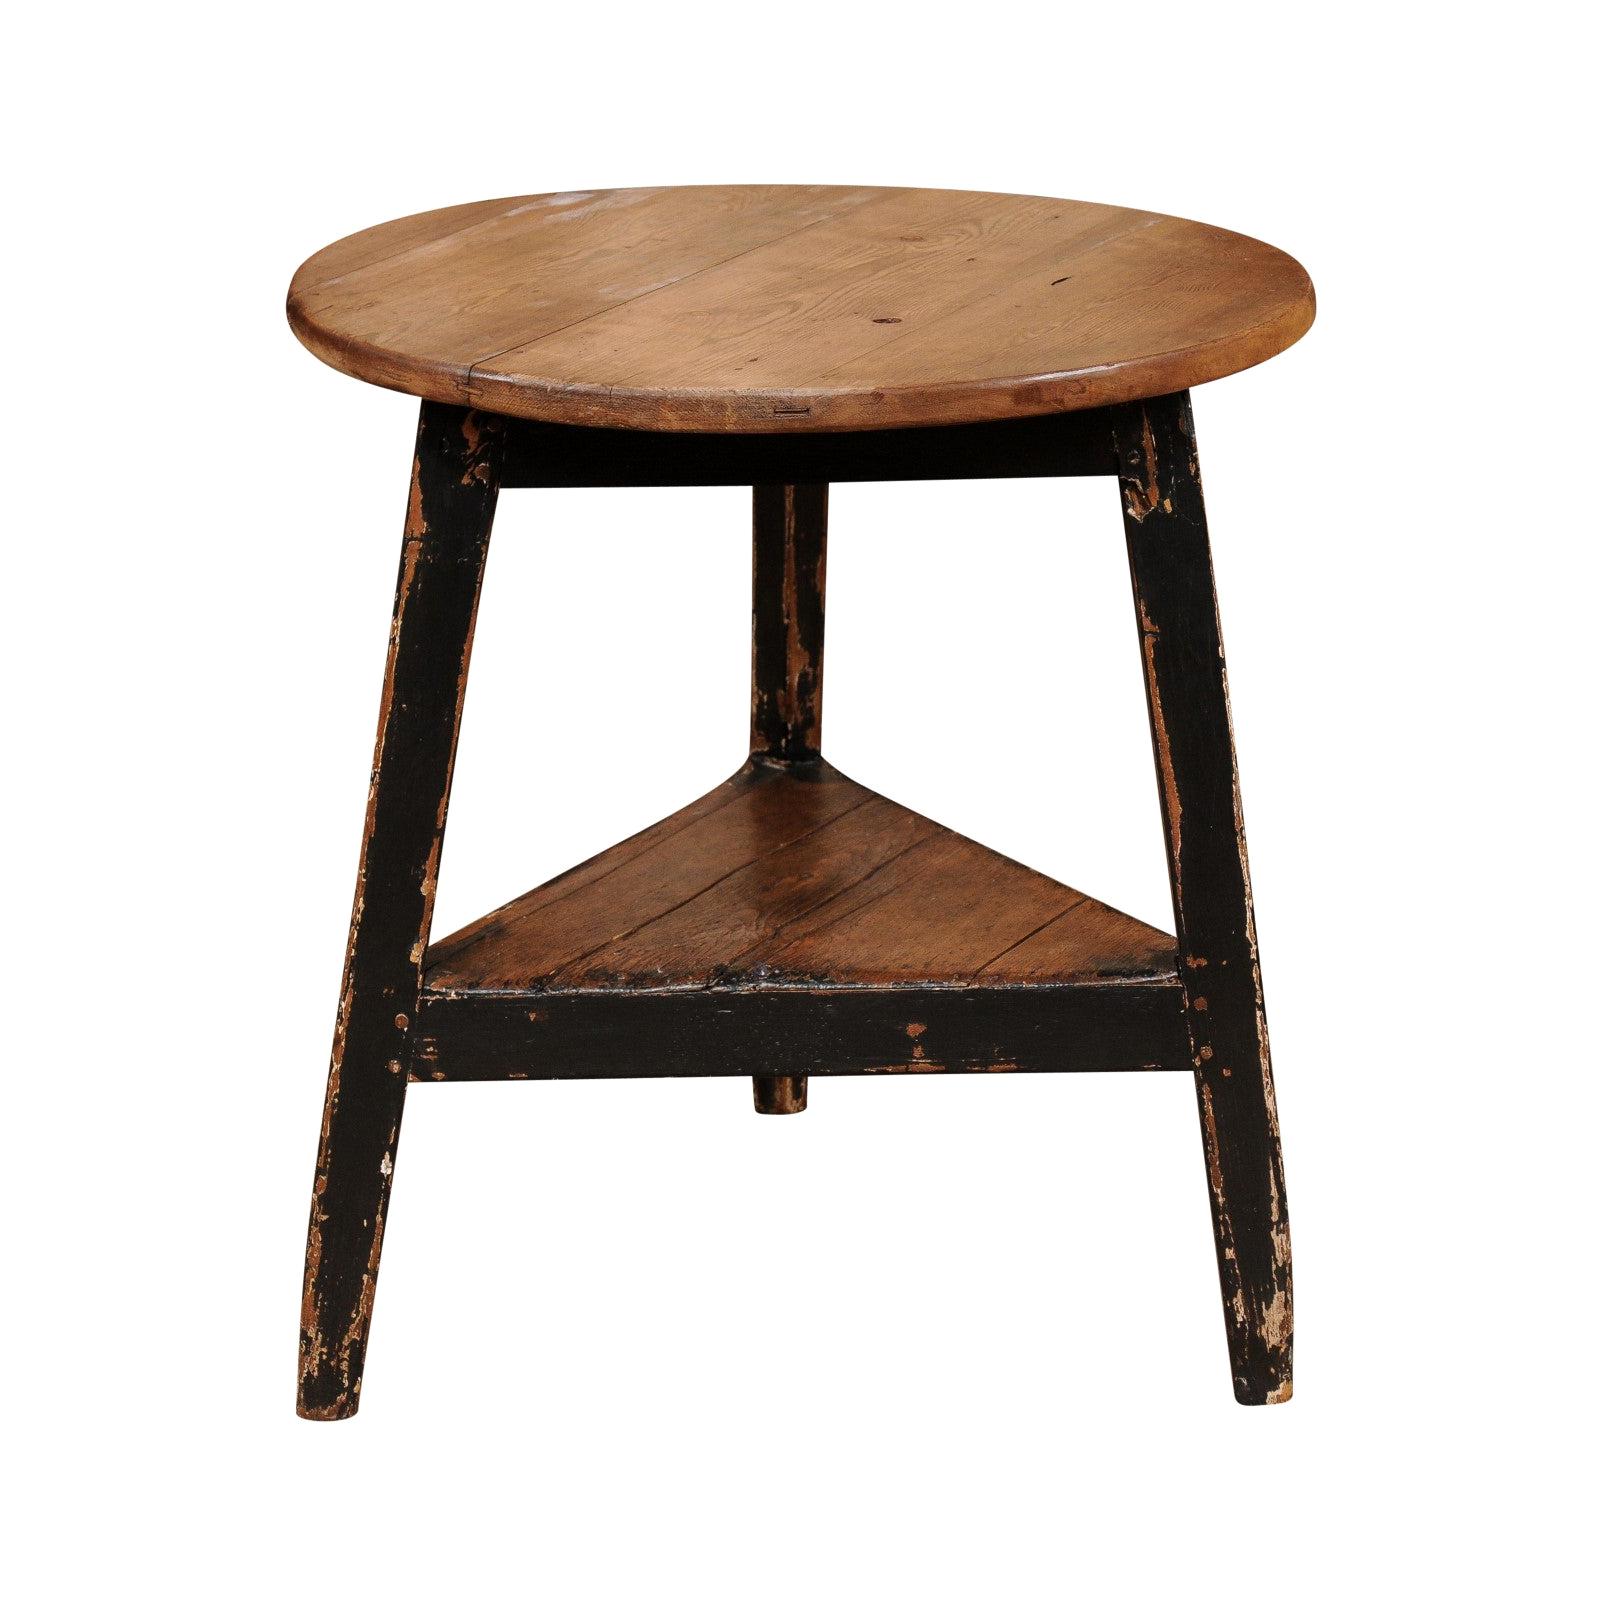 English 19th Century Pine and Black Painted Round Cricket Table